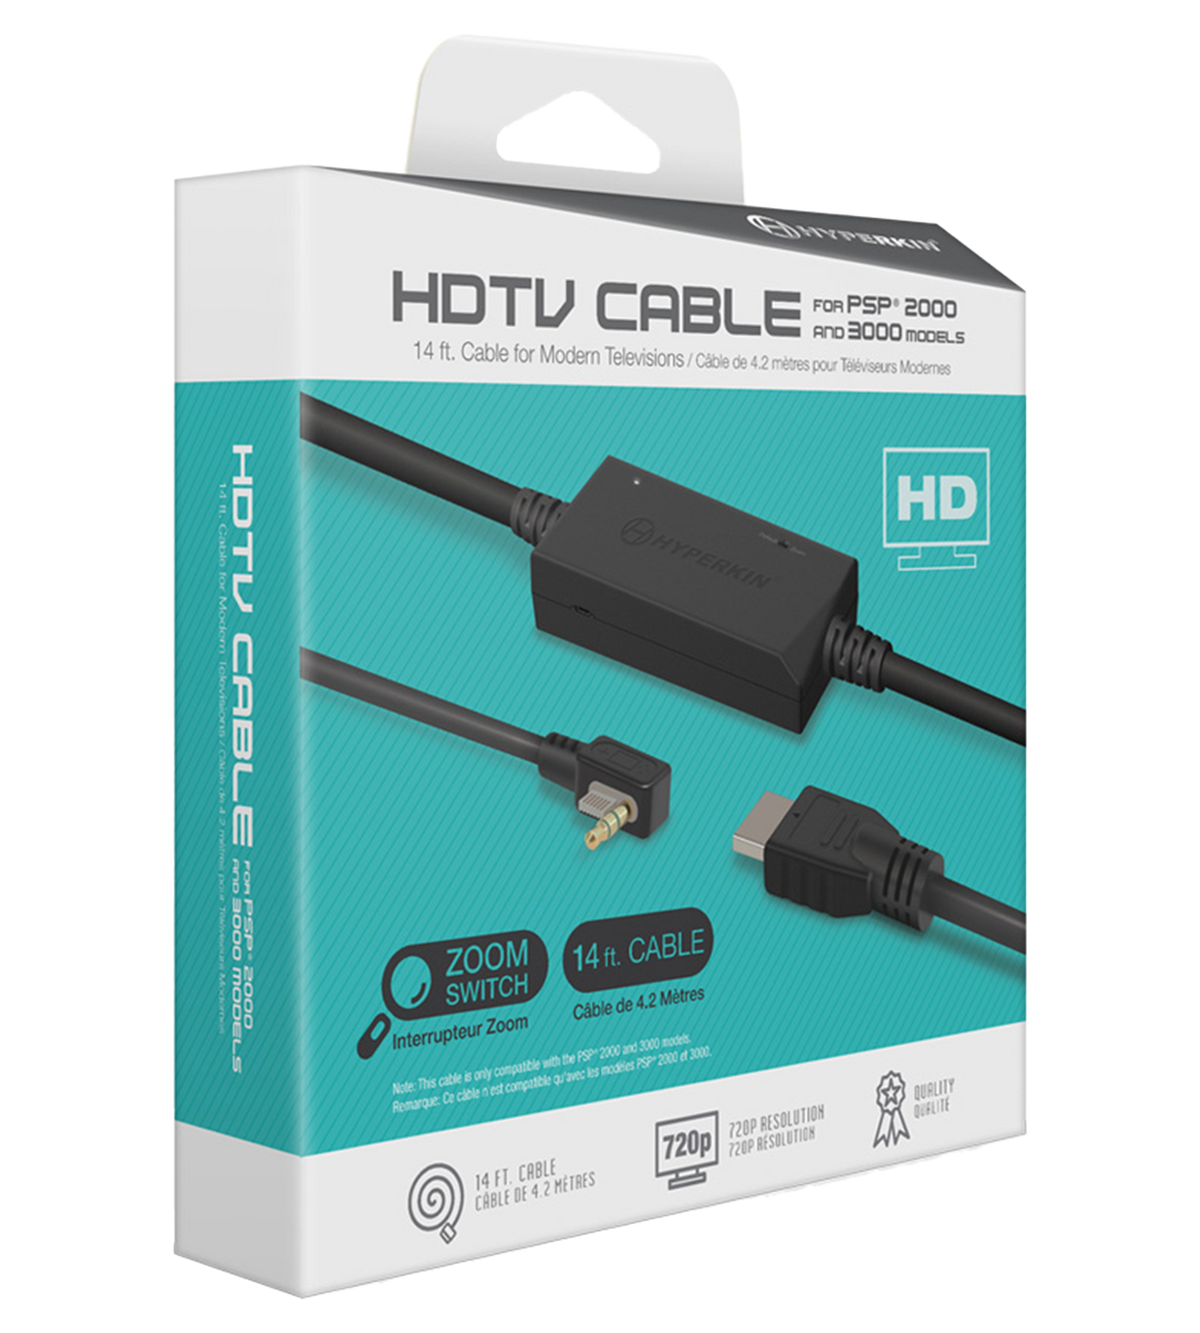 Hyperkin PSP® 2000 and 3000 HDMI Link Cable – Run Games